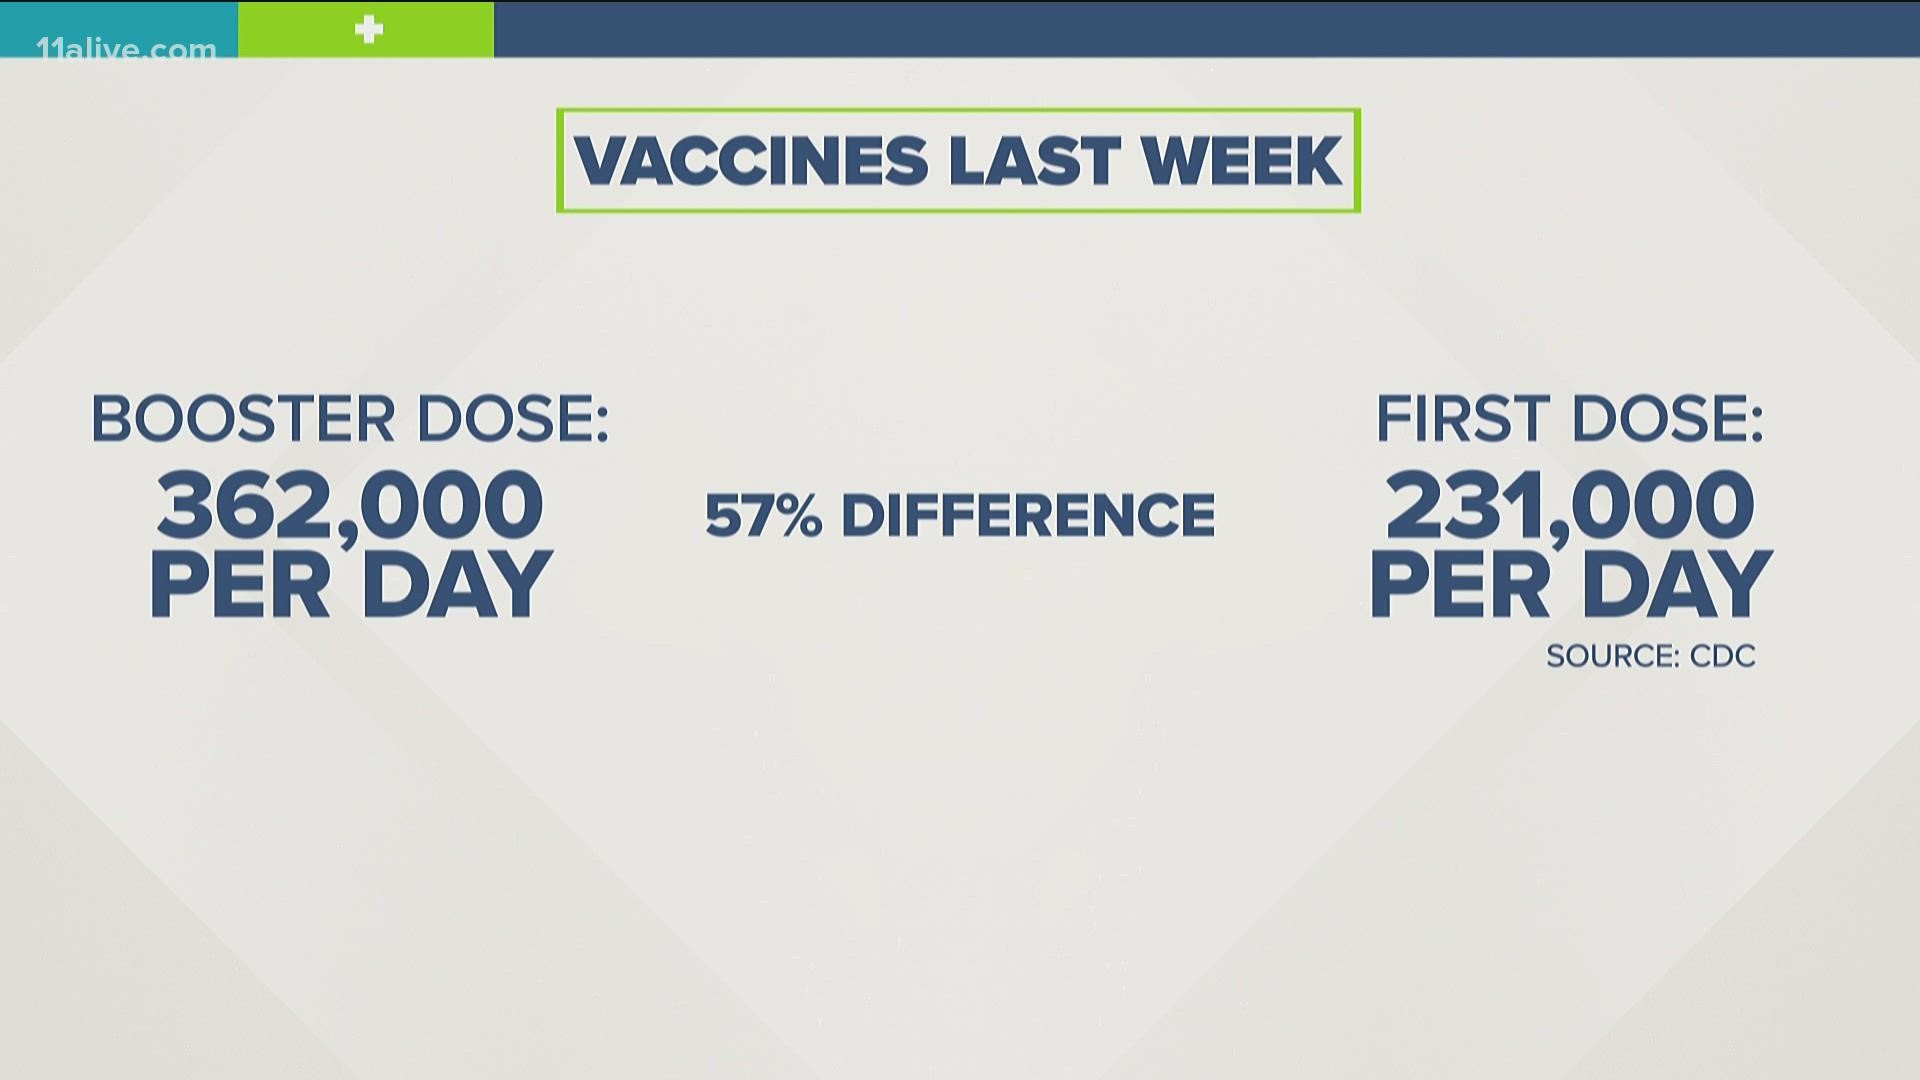 New numbers tonight from the CDC show more people getting a booster dose of the Pfizer vaccine that people getting their first dose of the vaccine.